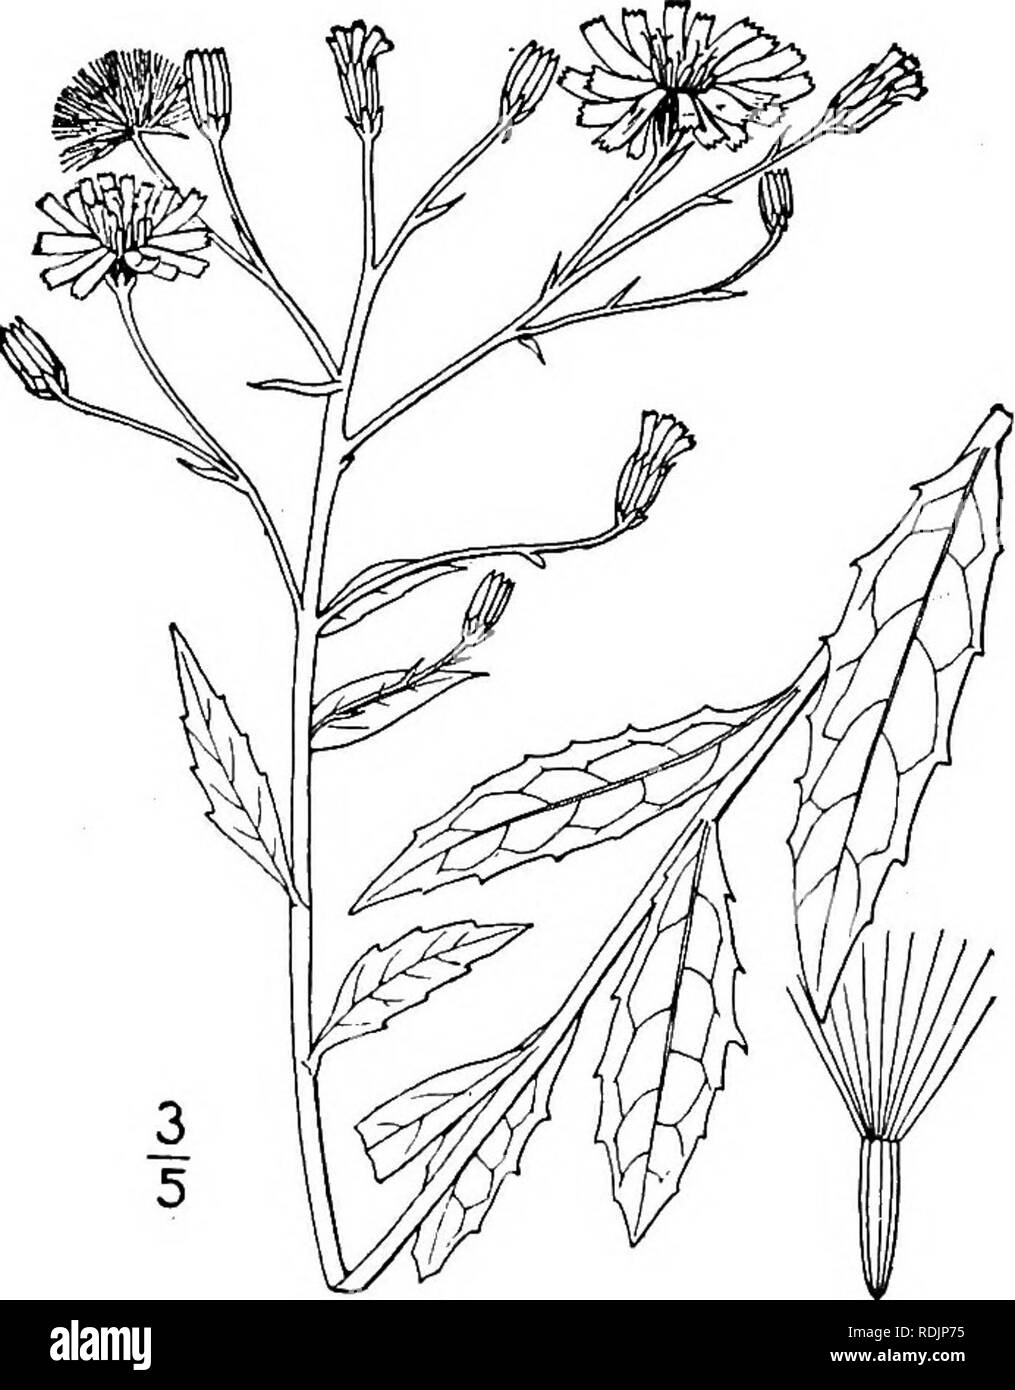 . An illustrated flora of the northern United States, Canada and the British possessions, from Newfoundland to the parallel of the southern boundary of Virginia, and from the Atlantic Ocean westward to the 102d meridian. Botany; Botany. 2. Hieracium vulgatum Fries. Fig. 4095. Hawkweed. H. molle Pursh, Fl. Am. Sept. 503. 1814. Not Jacq. 1774. H. vulgatum Fries, Fl. Hall. 128. 1817-18. Similar to the preceding species, sometimes taller and slightly glaucous; stem 2-5-leaved, pubescent or glabrate. Basal leaves oblong or lanceolate, acute at both ends, or some of them obtuse at the apex, coarsely Stock Photo